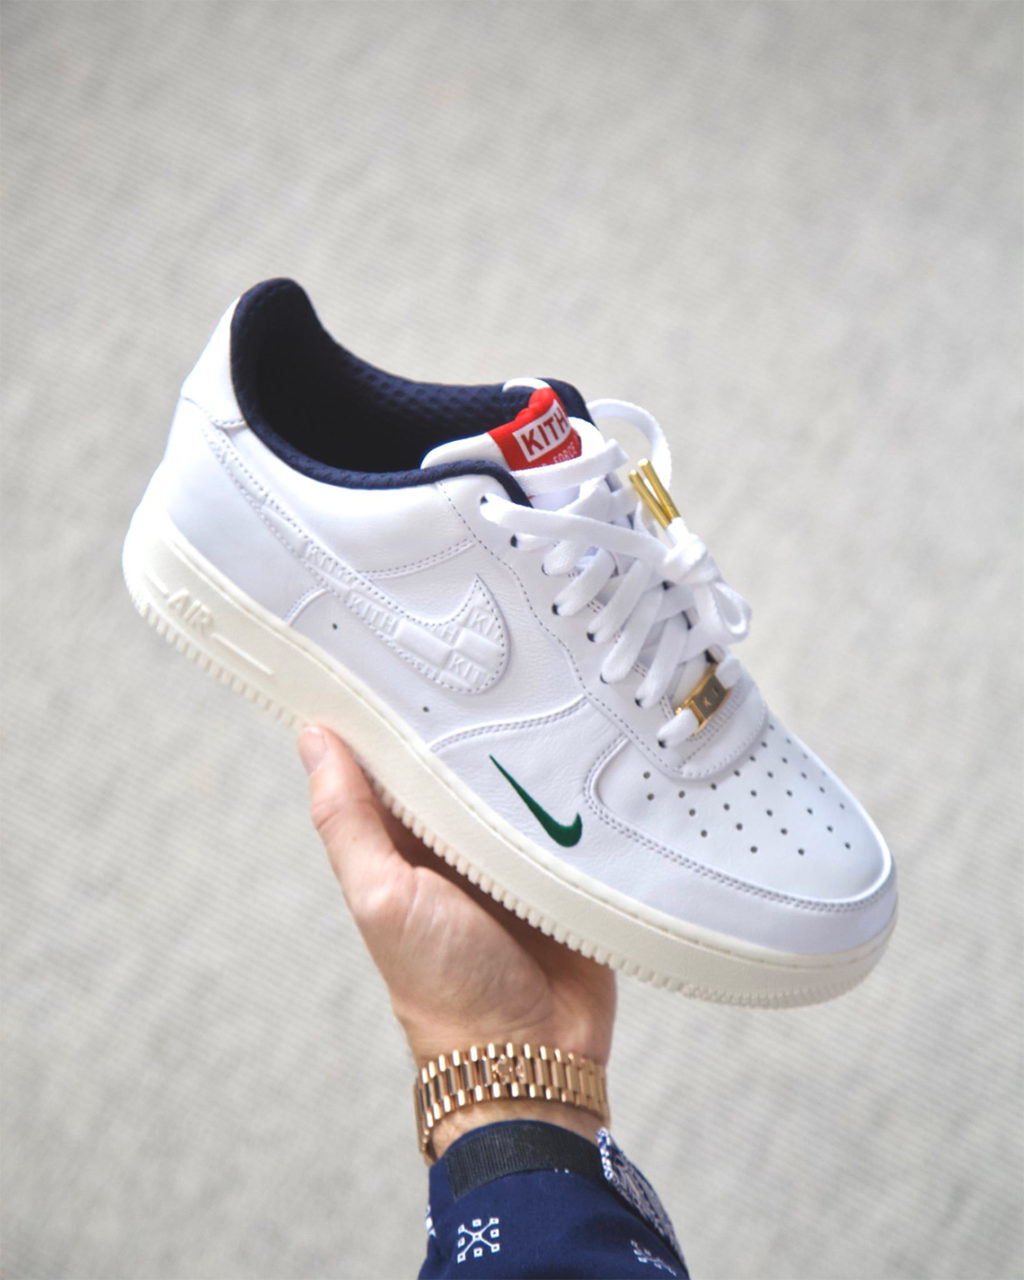 Kith x Nike Air Force 1 Low - Sneakers.fr